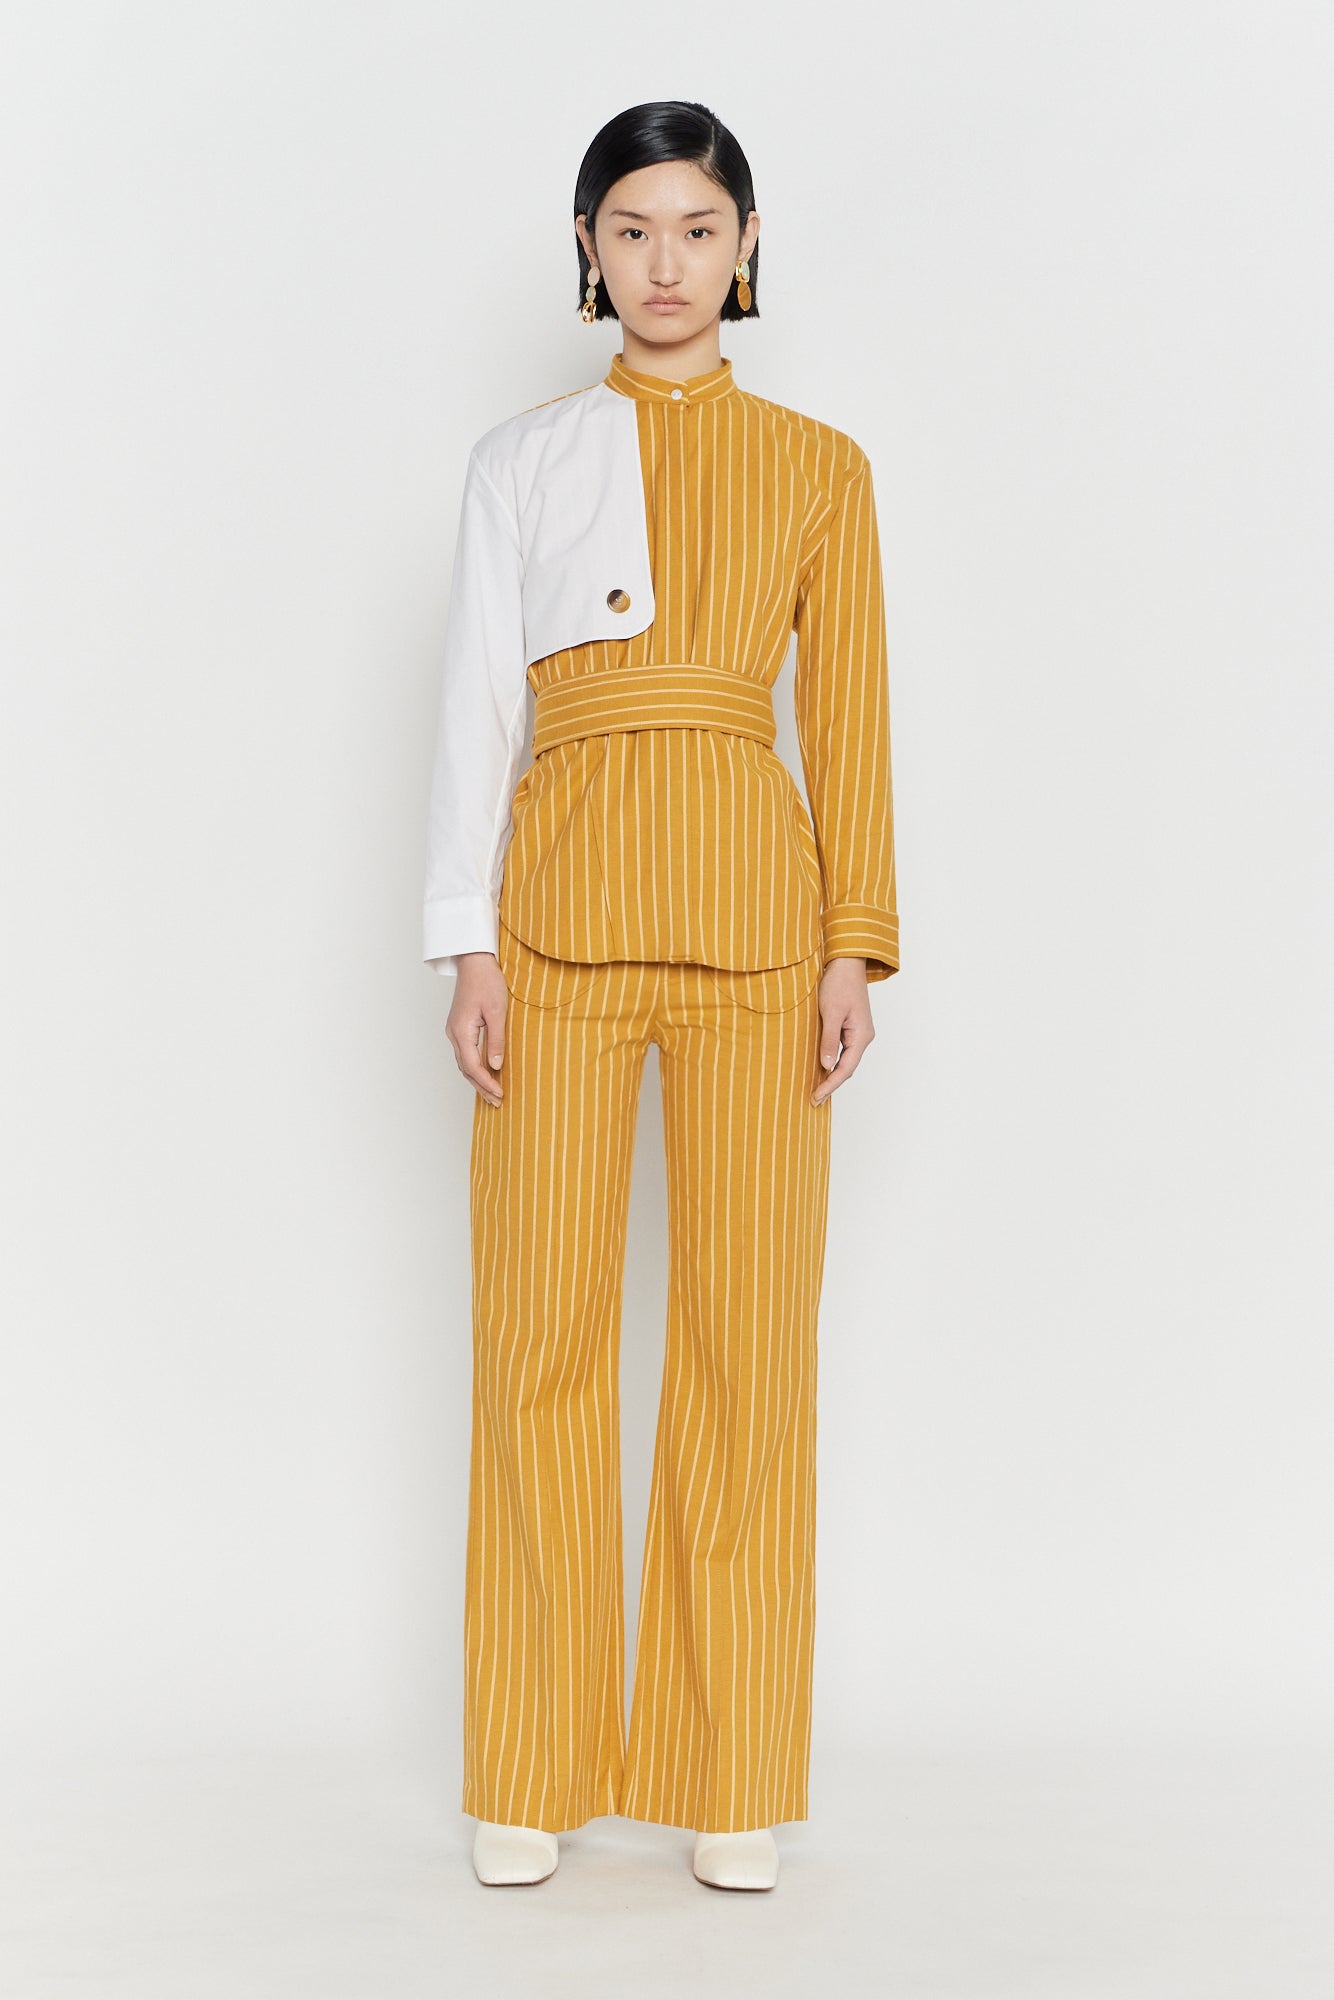 Mustard Striped Shirt with White Sleeve